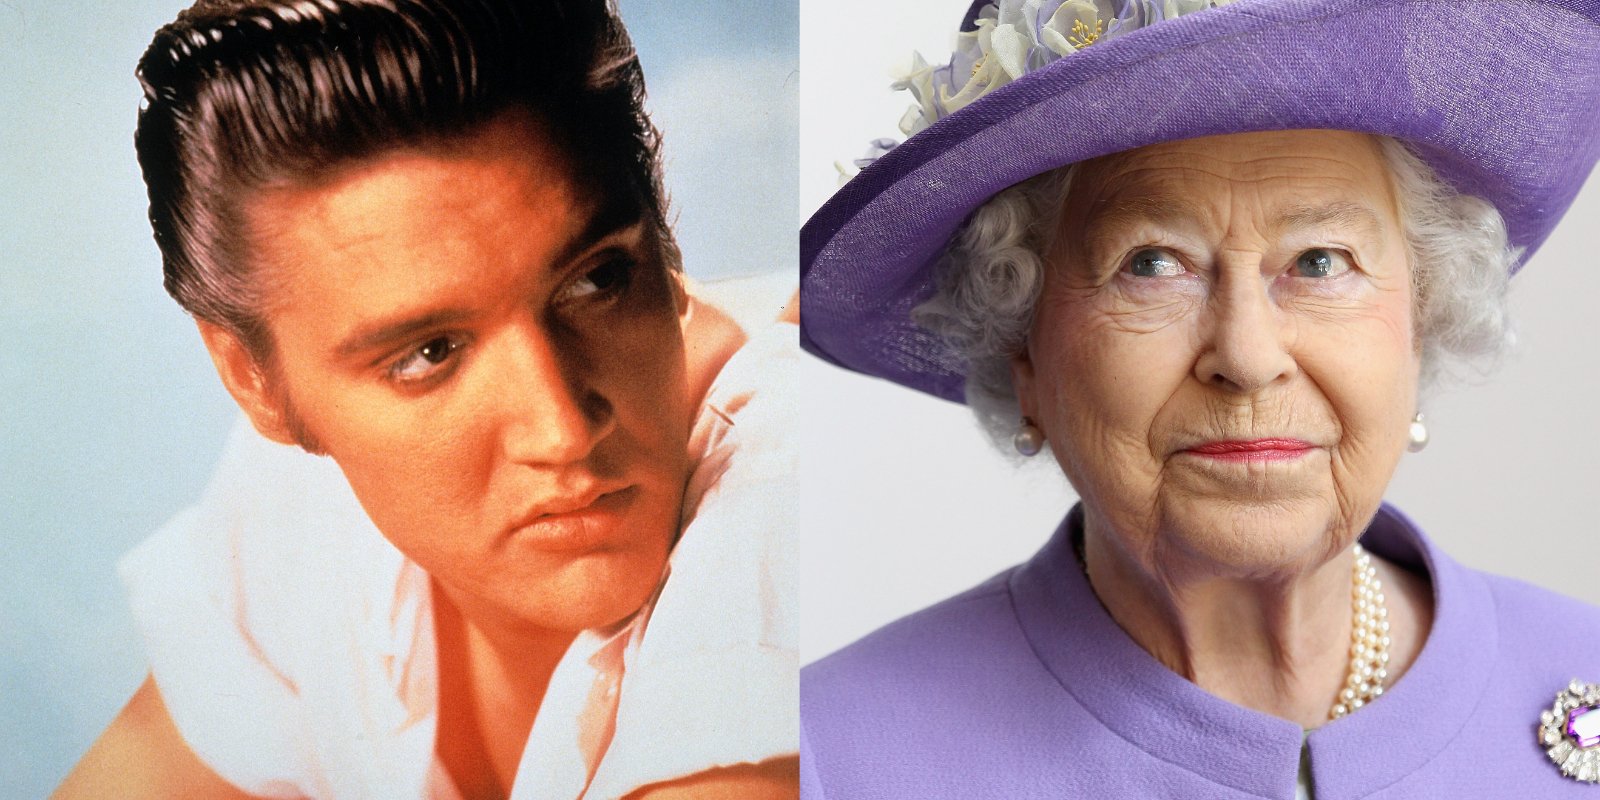 Elvis Presley and Queen Elizabeth in side by side photographs.